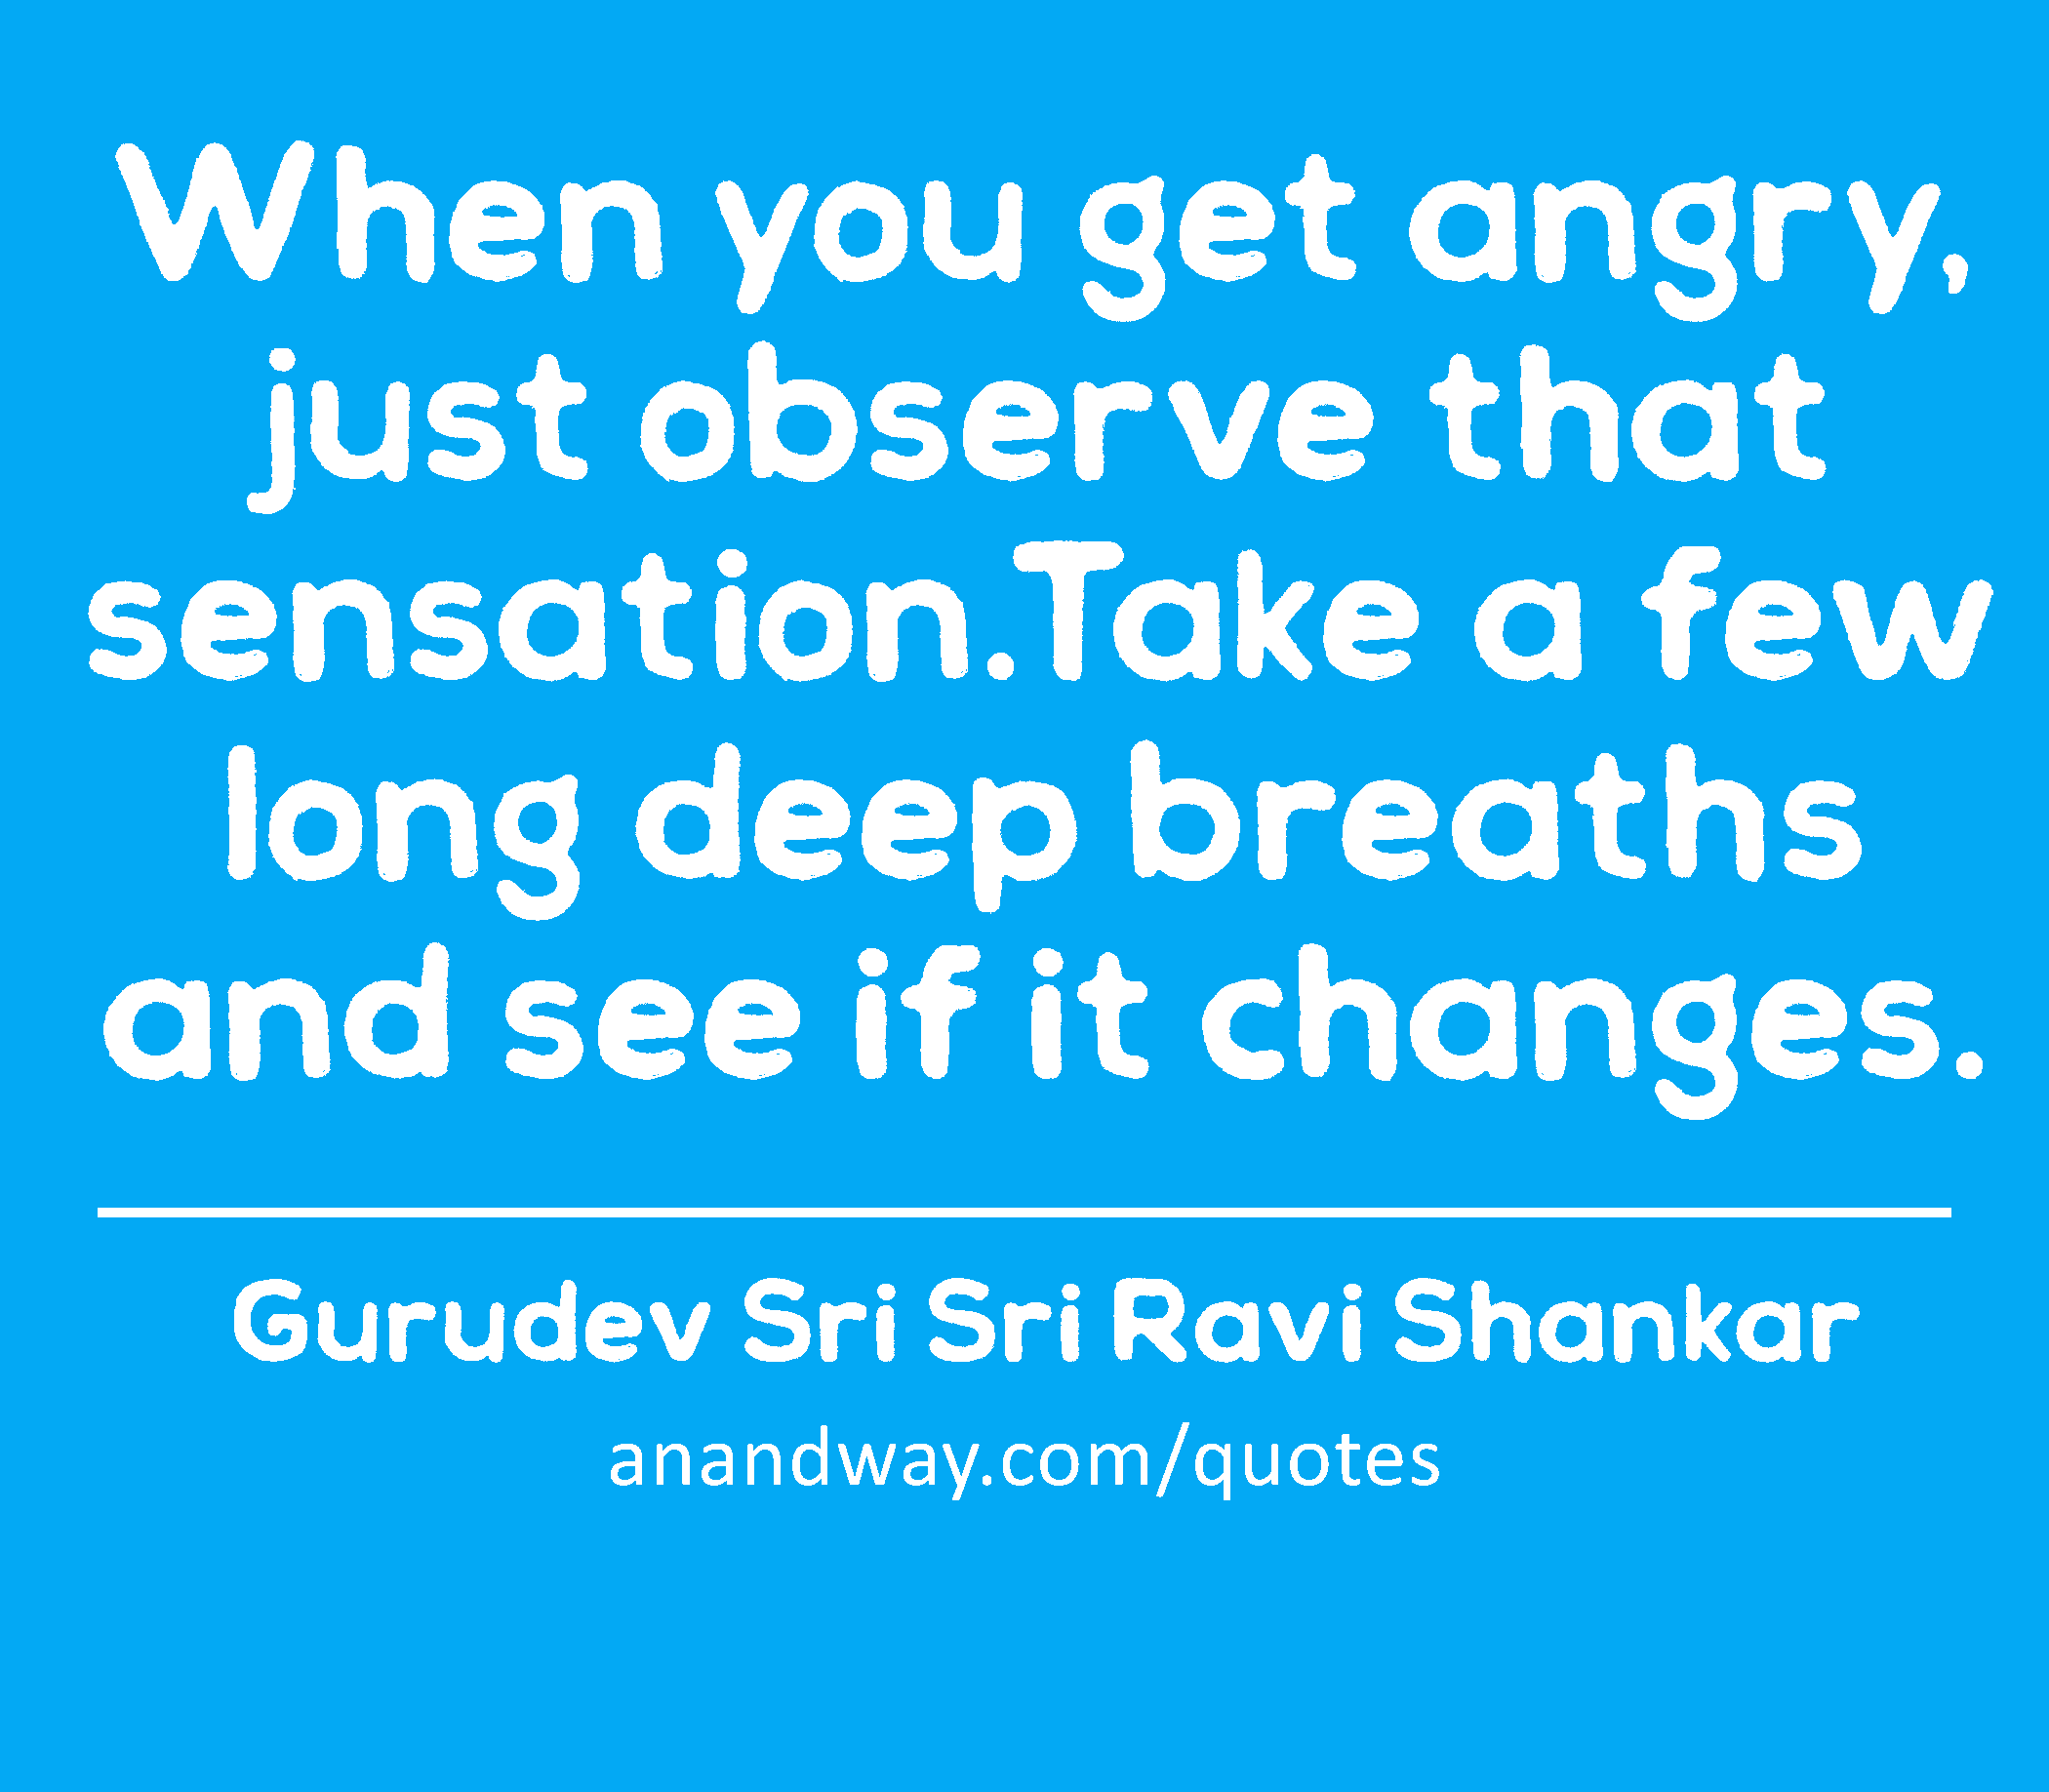 When you get angry, just observe that sensation.Take a few long deep breaths and see if it changes.
 -Gurudev Sri Sri Ravi Shankar